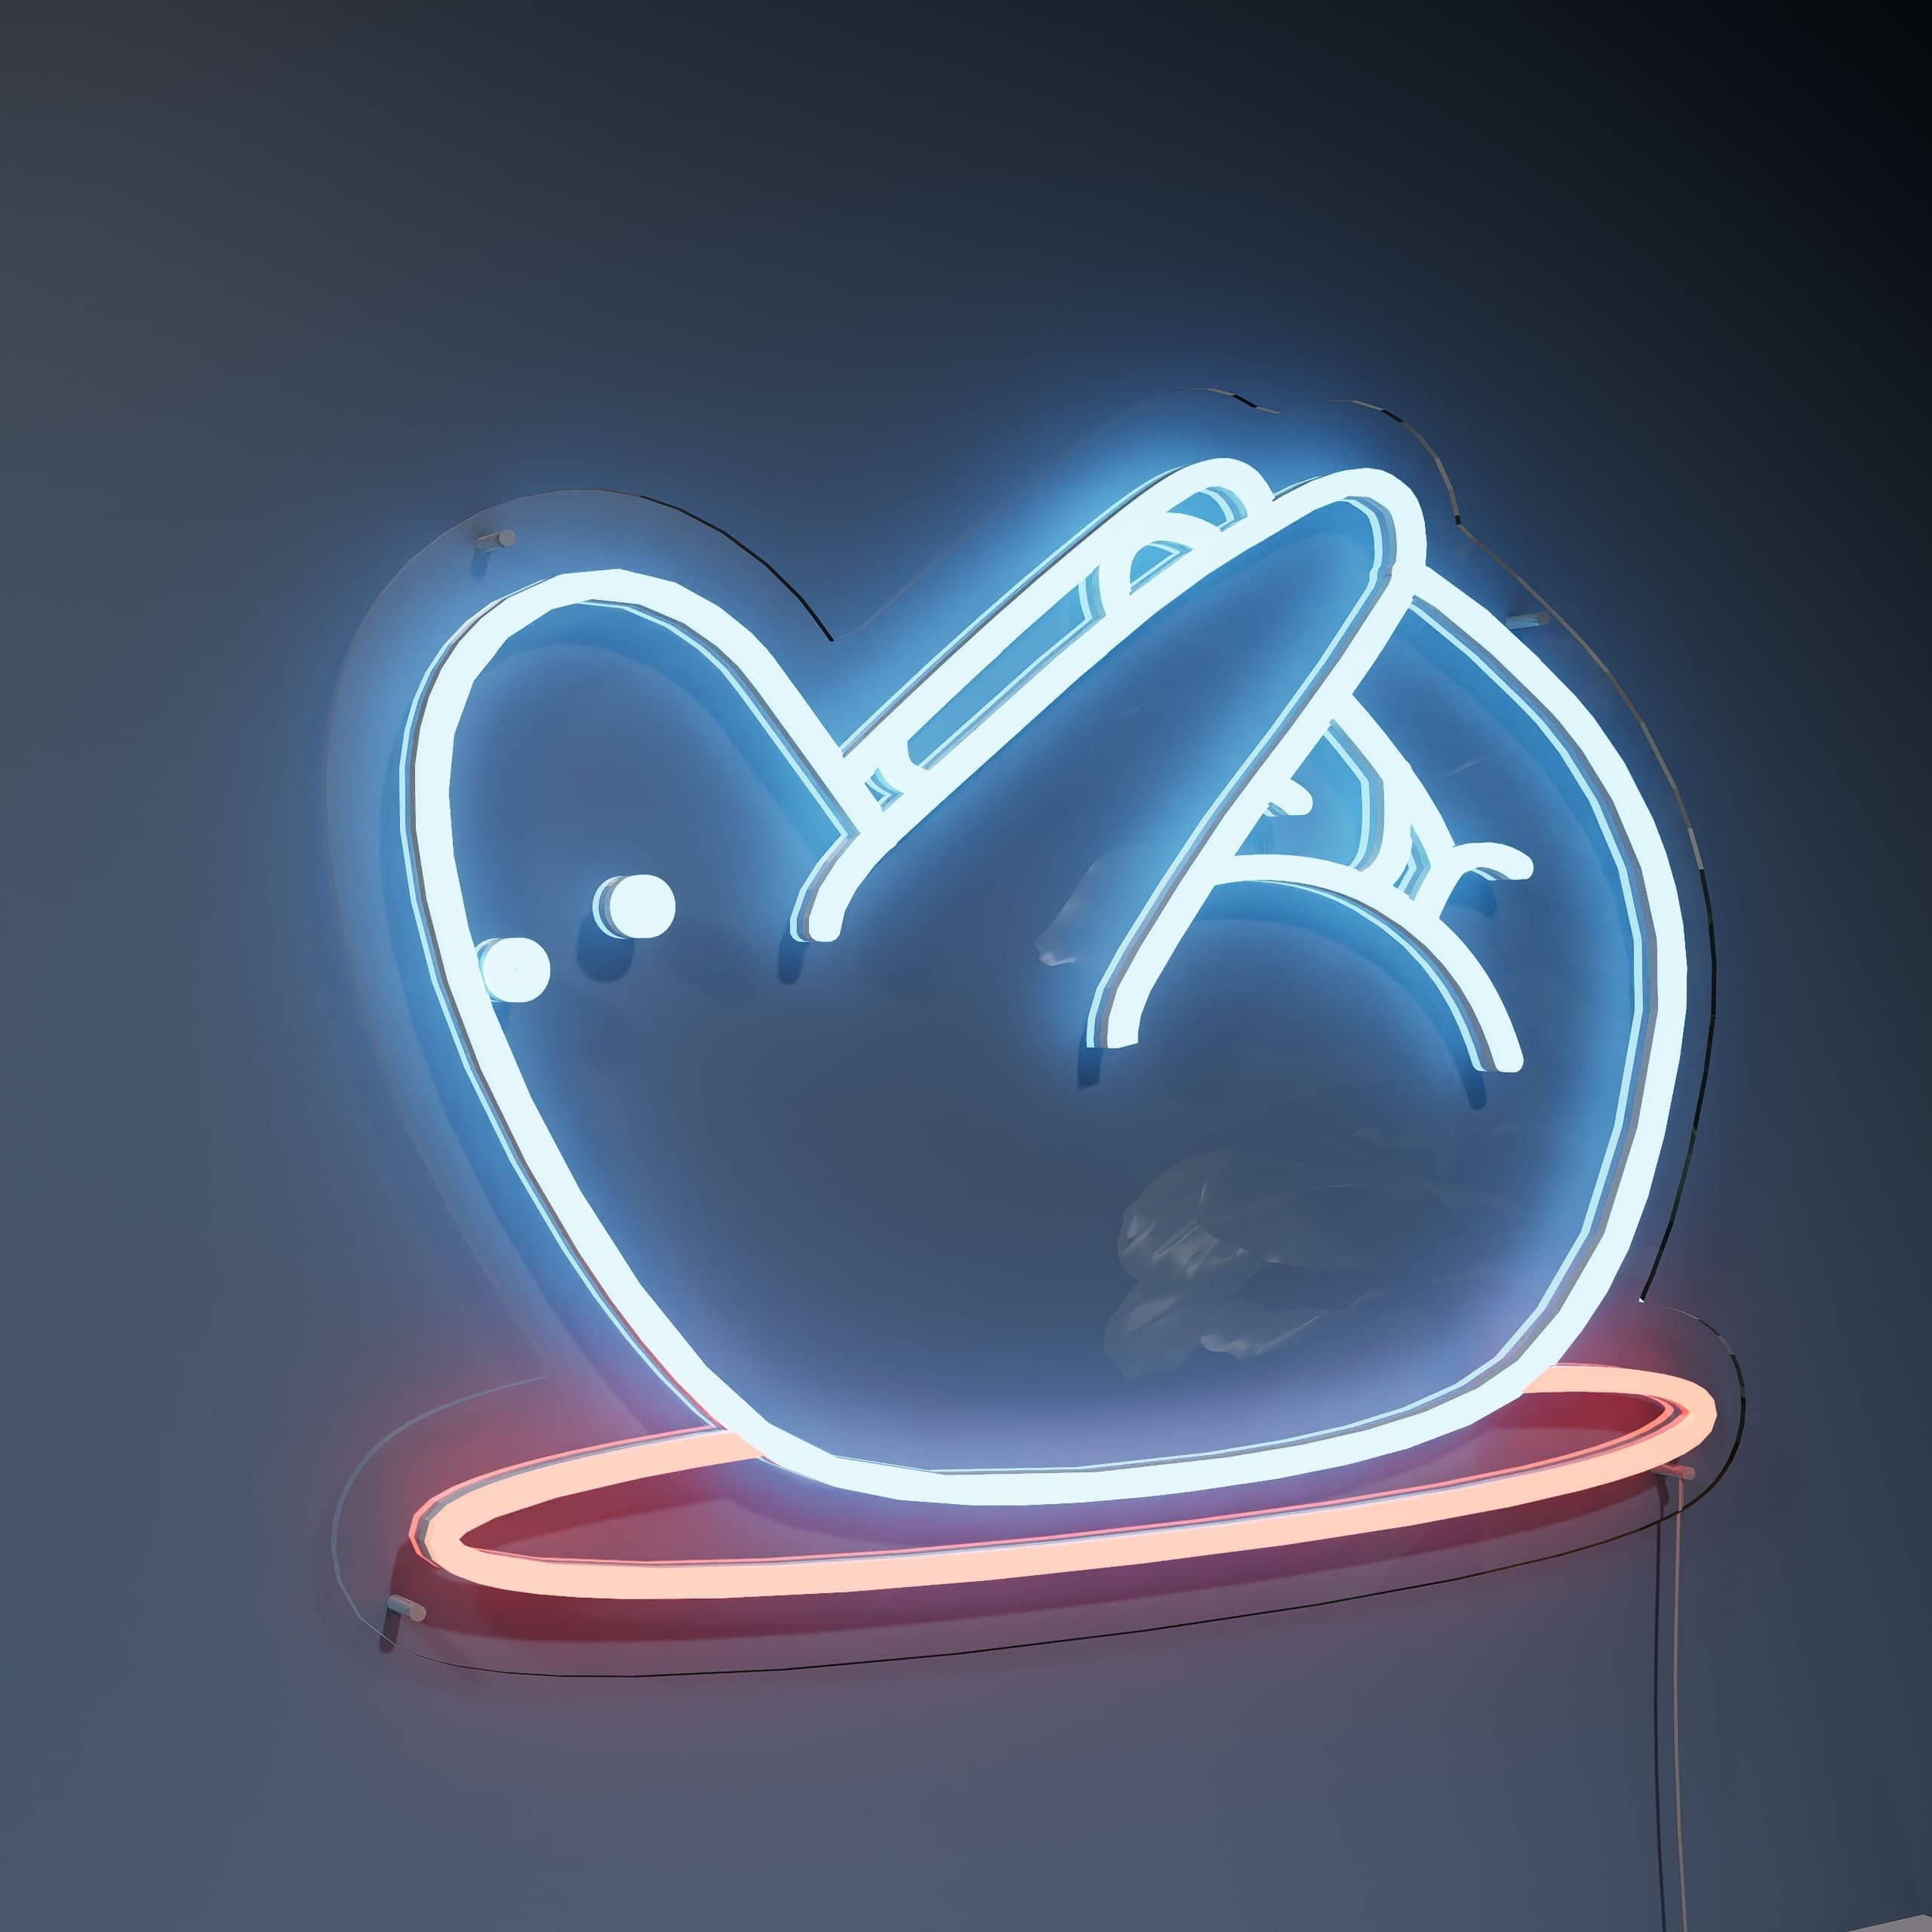 Funny neon signs bring playful light to shops